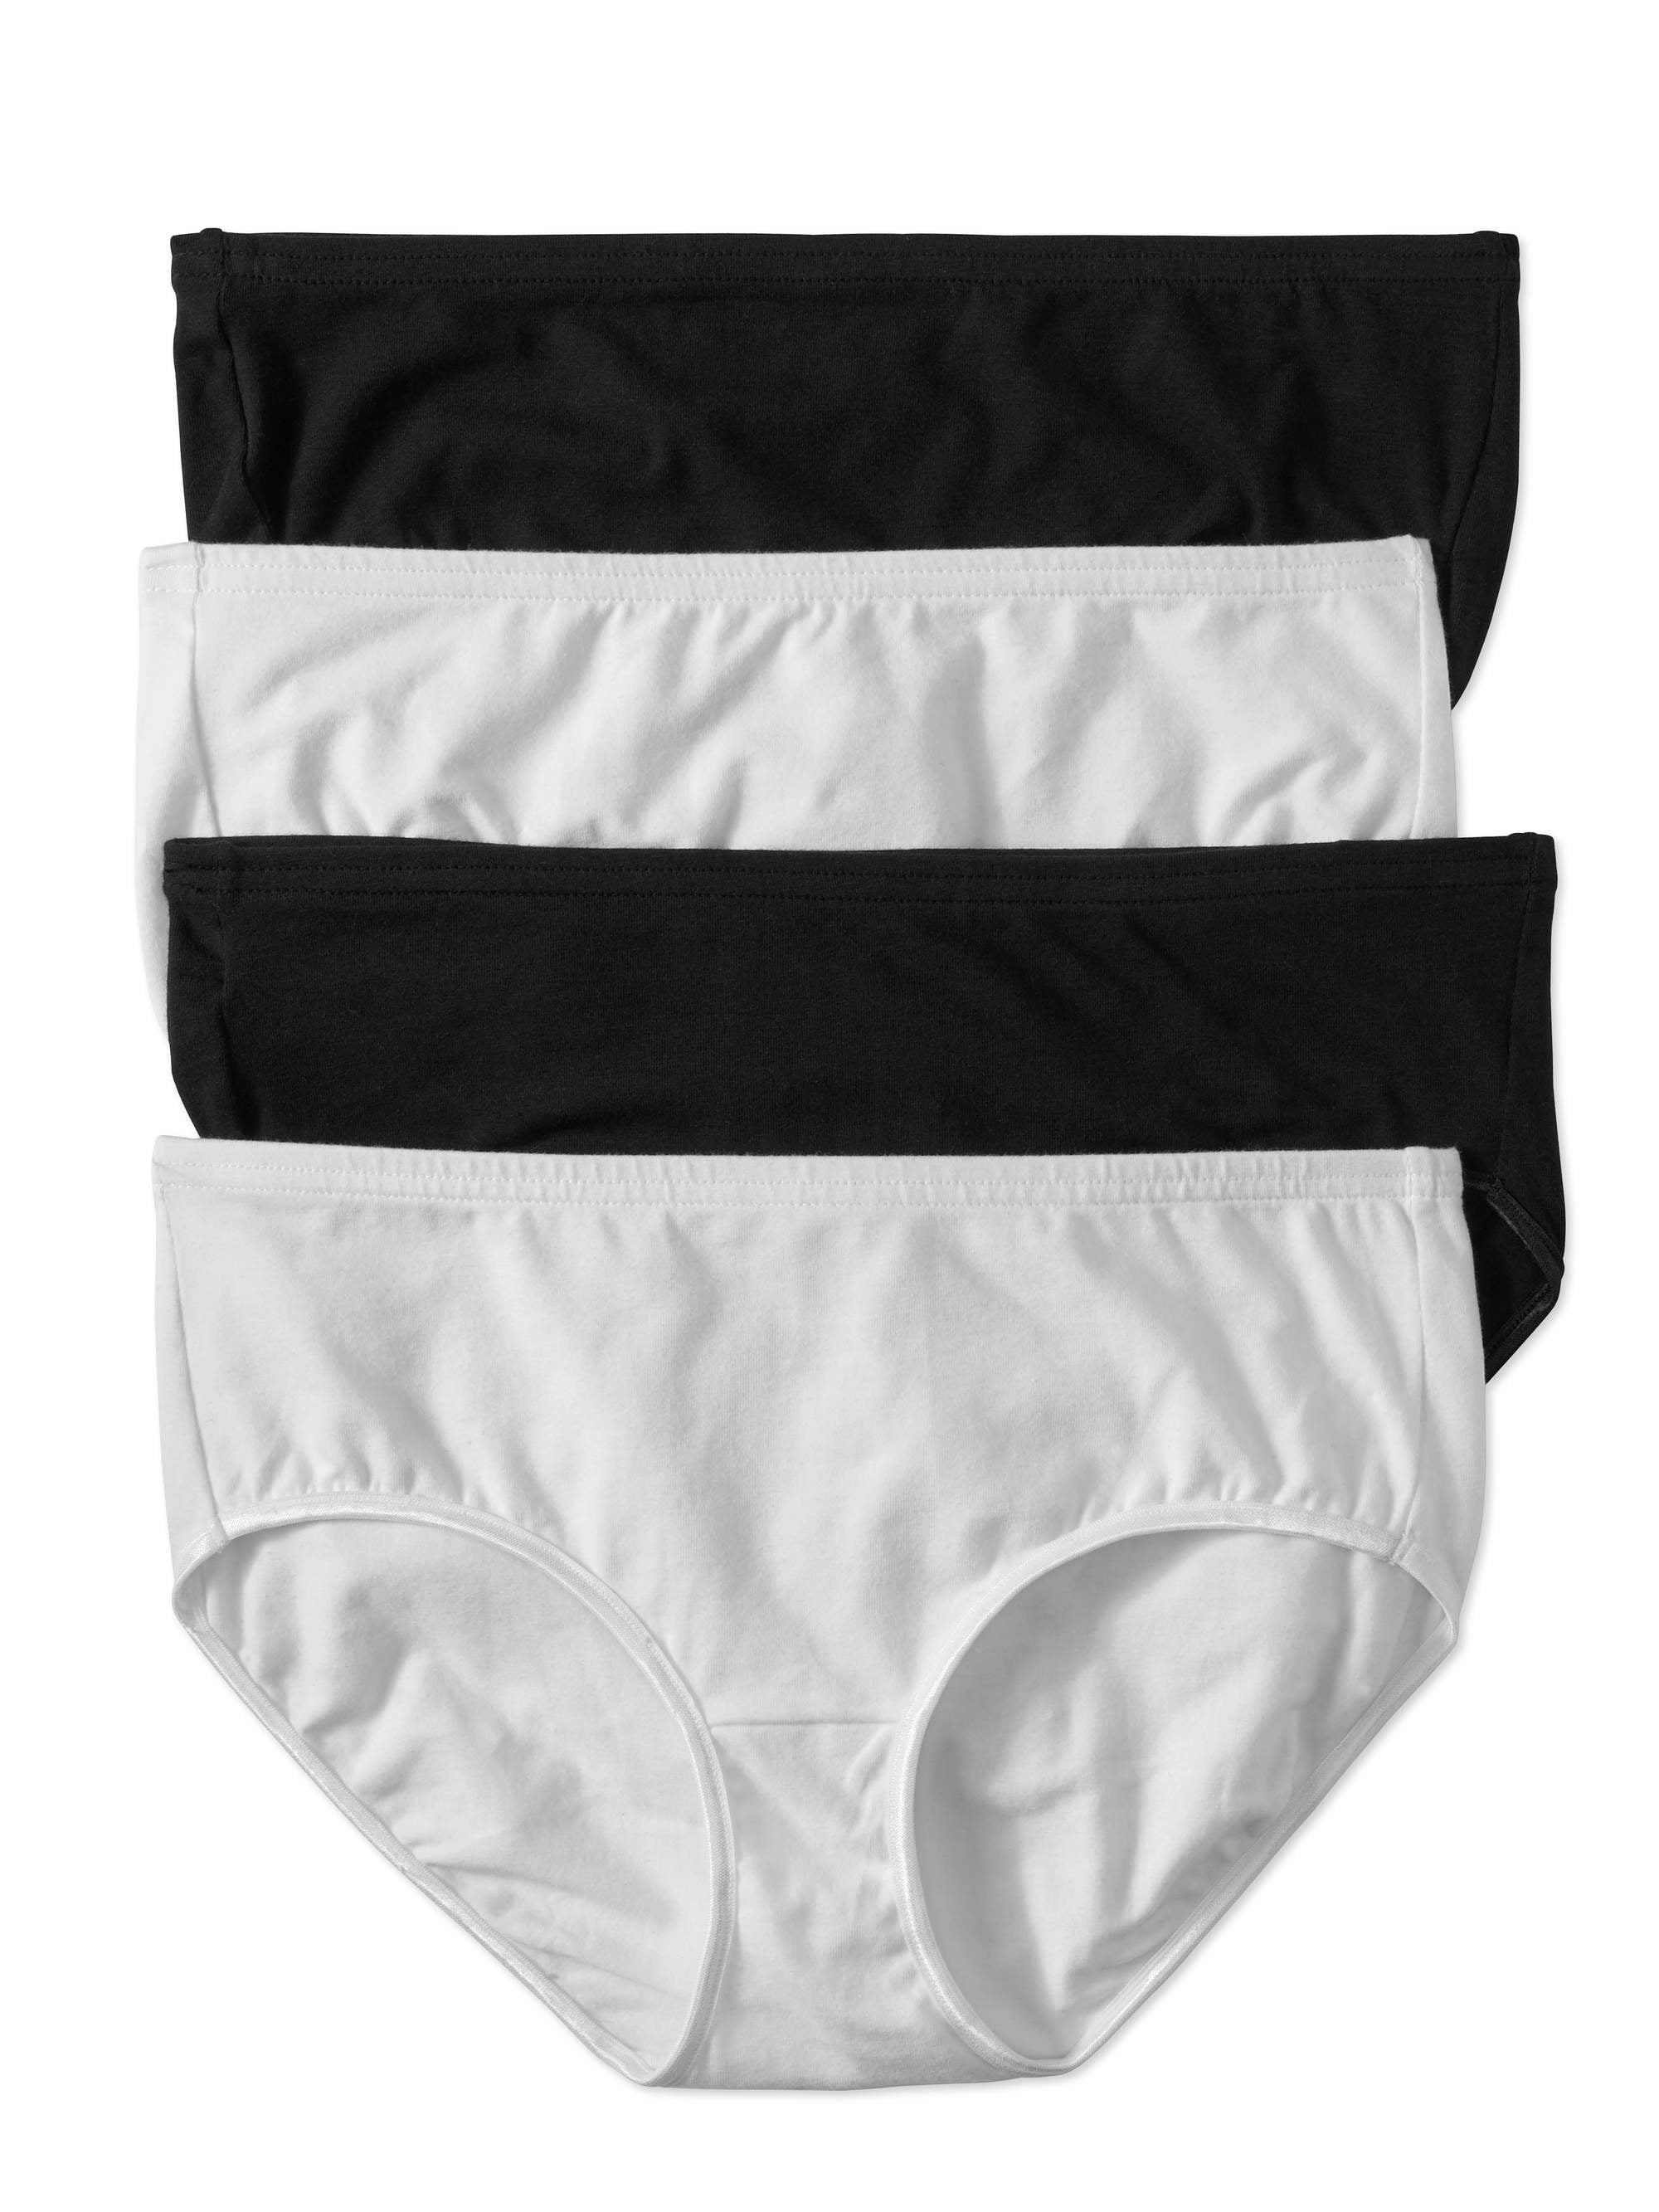 Best Fitting Panty Women's Cotton Stretch Thong, 4 Pack 